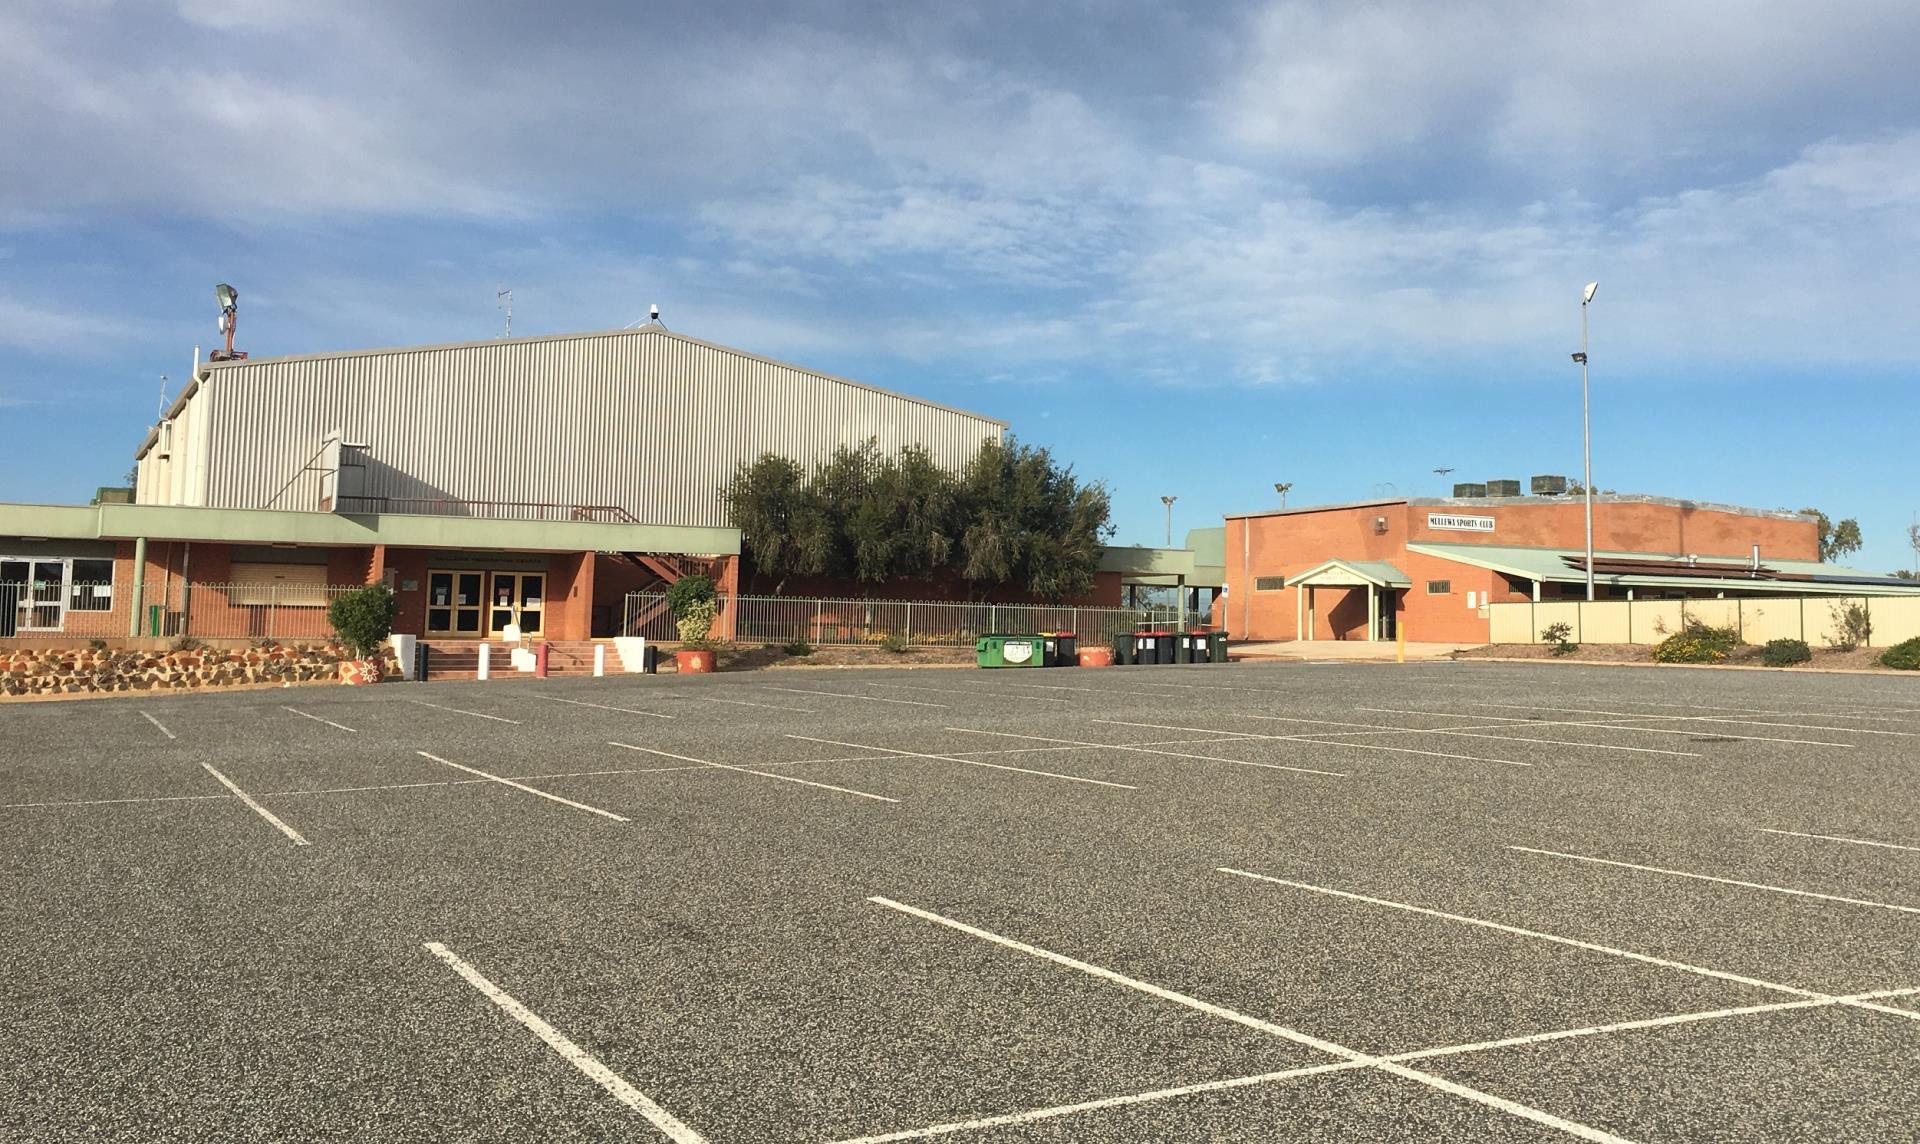 Mullewa Recreation Centre (left) and the Mullewa Sports Club